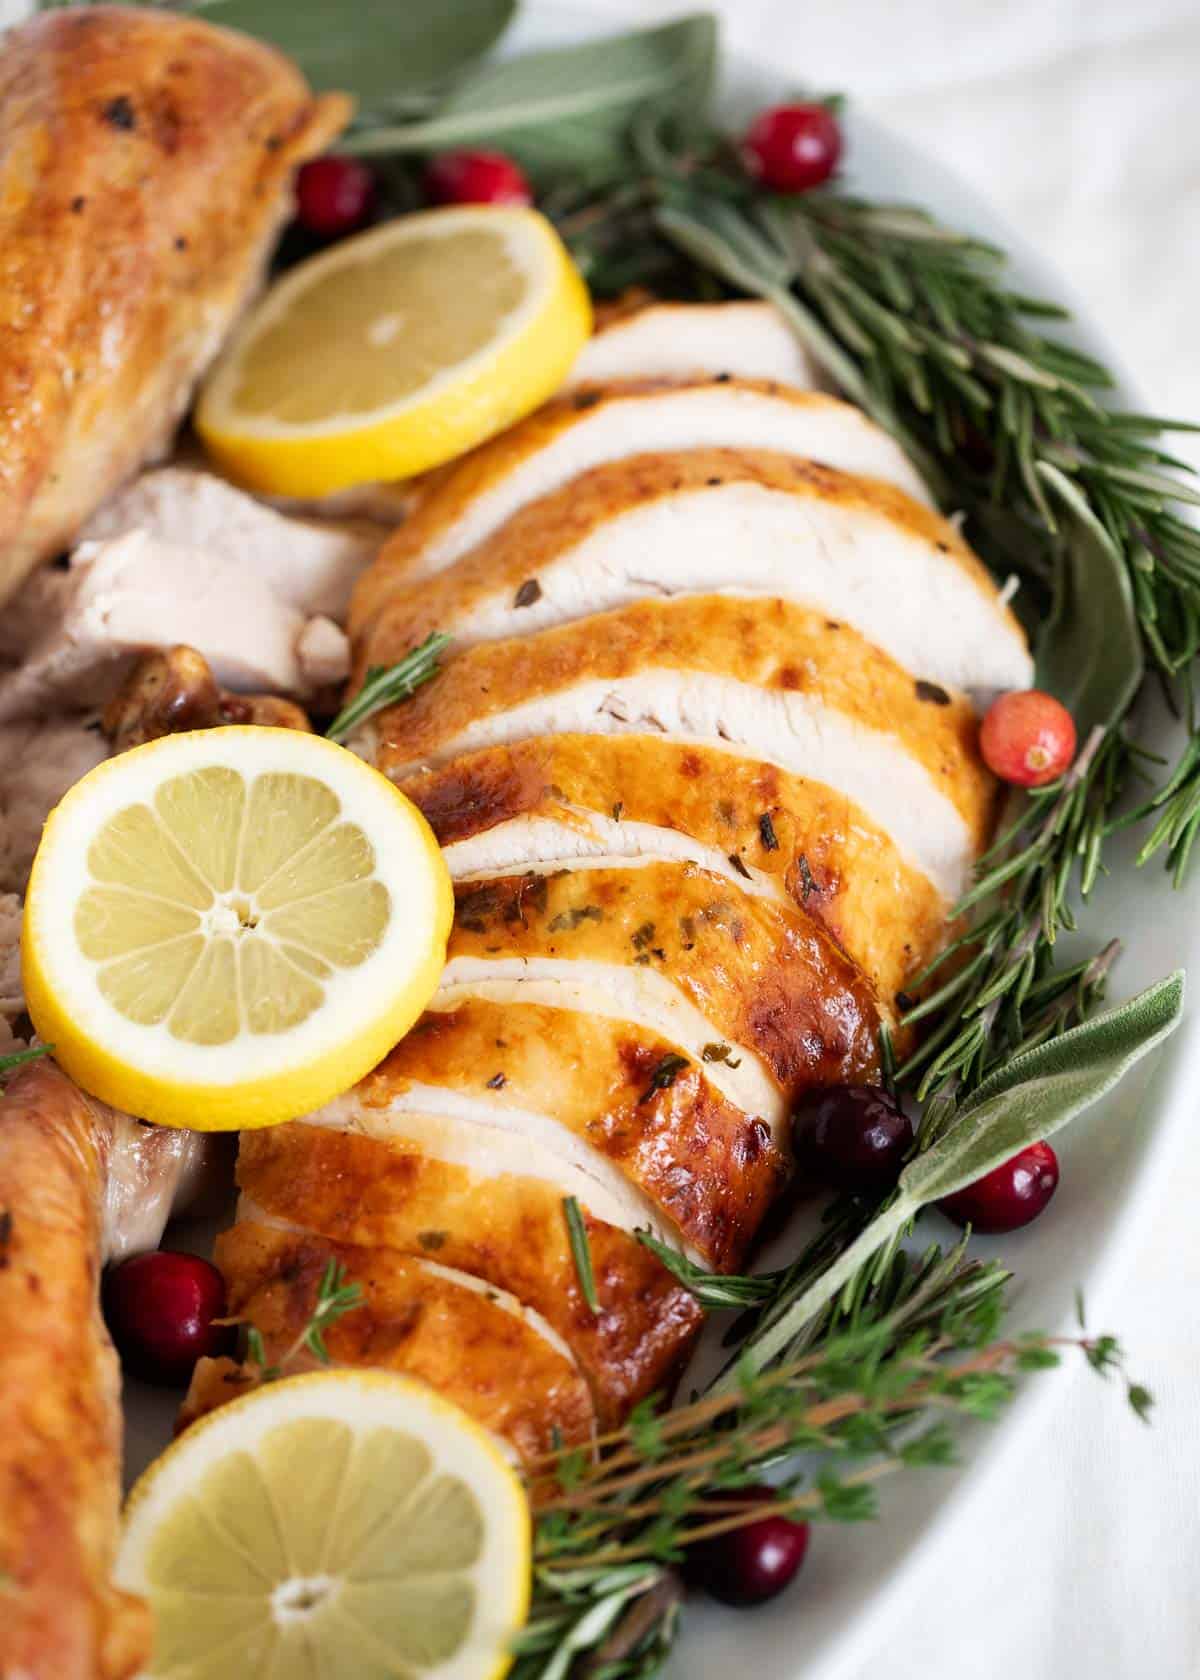 Turkey with lemon and herbs.